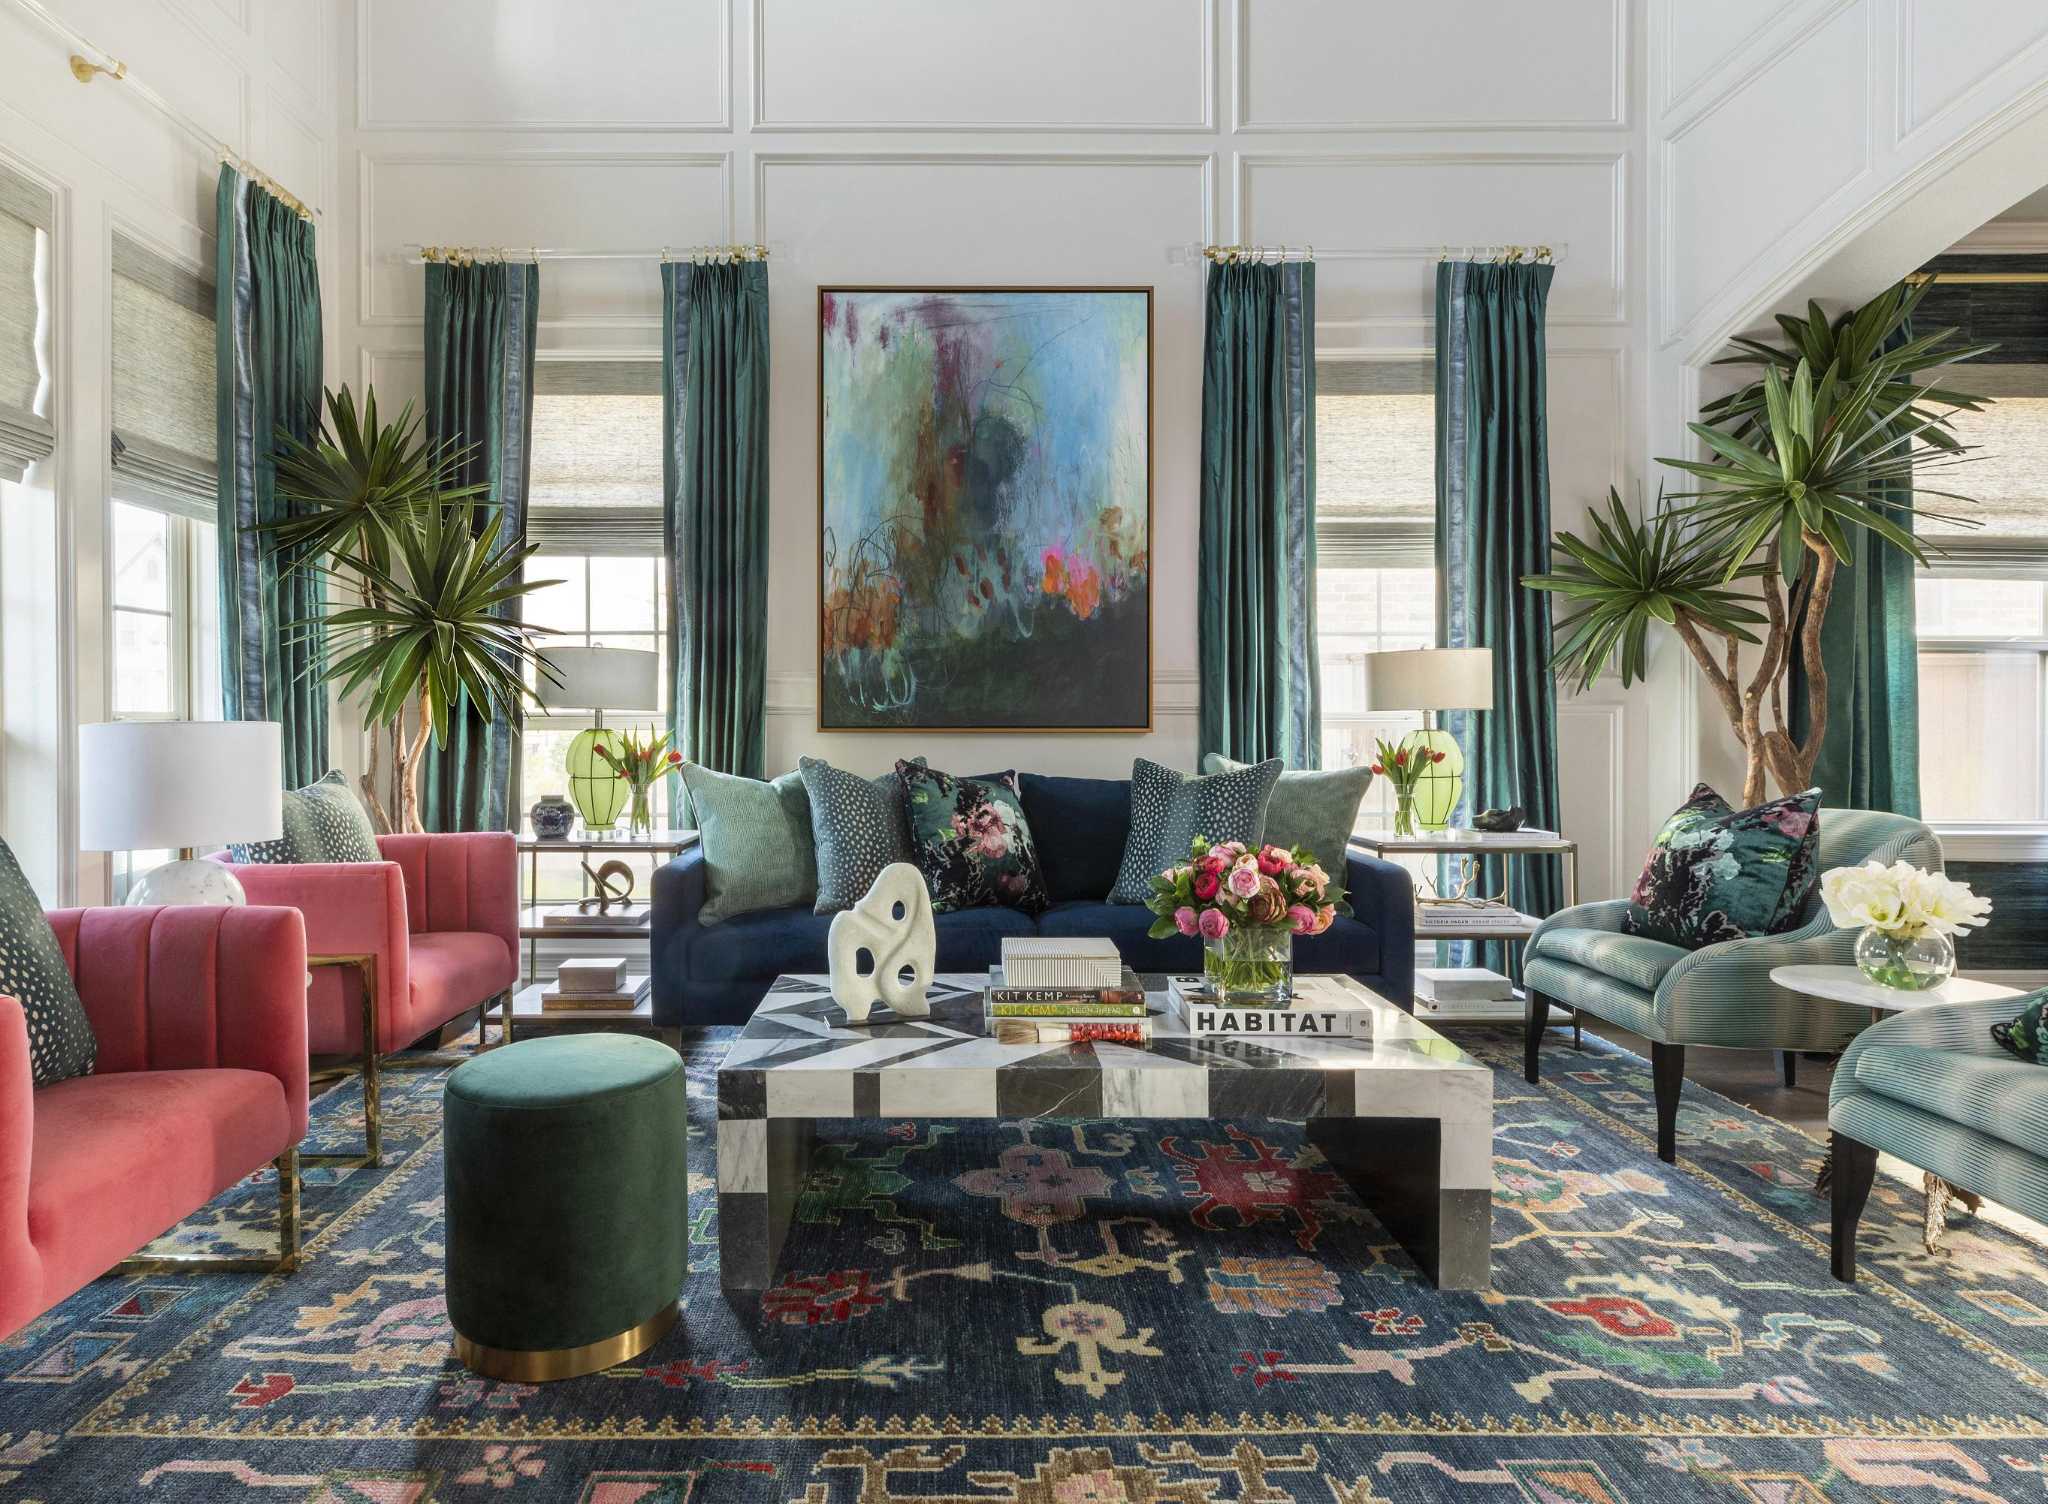 A Katy home’s drab living space is updated with color, design